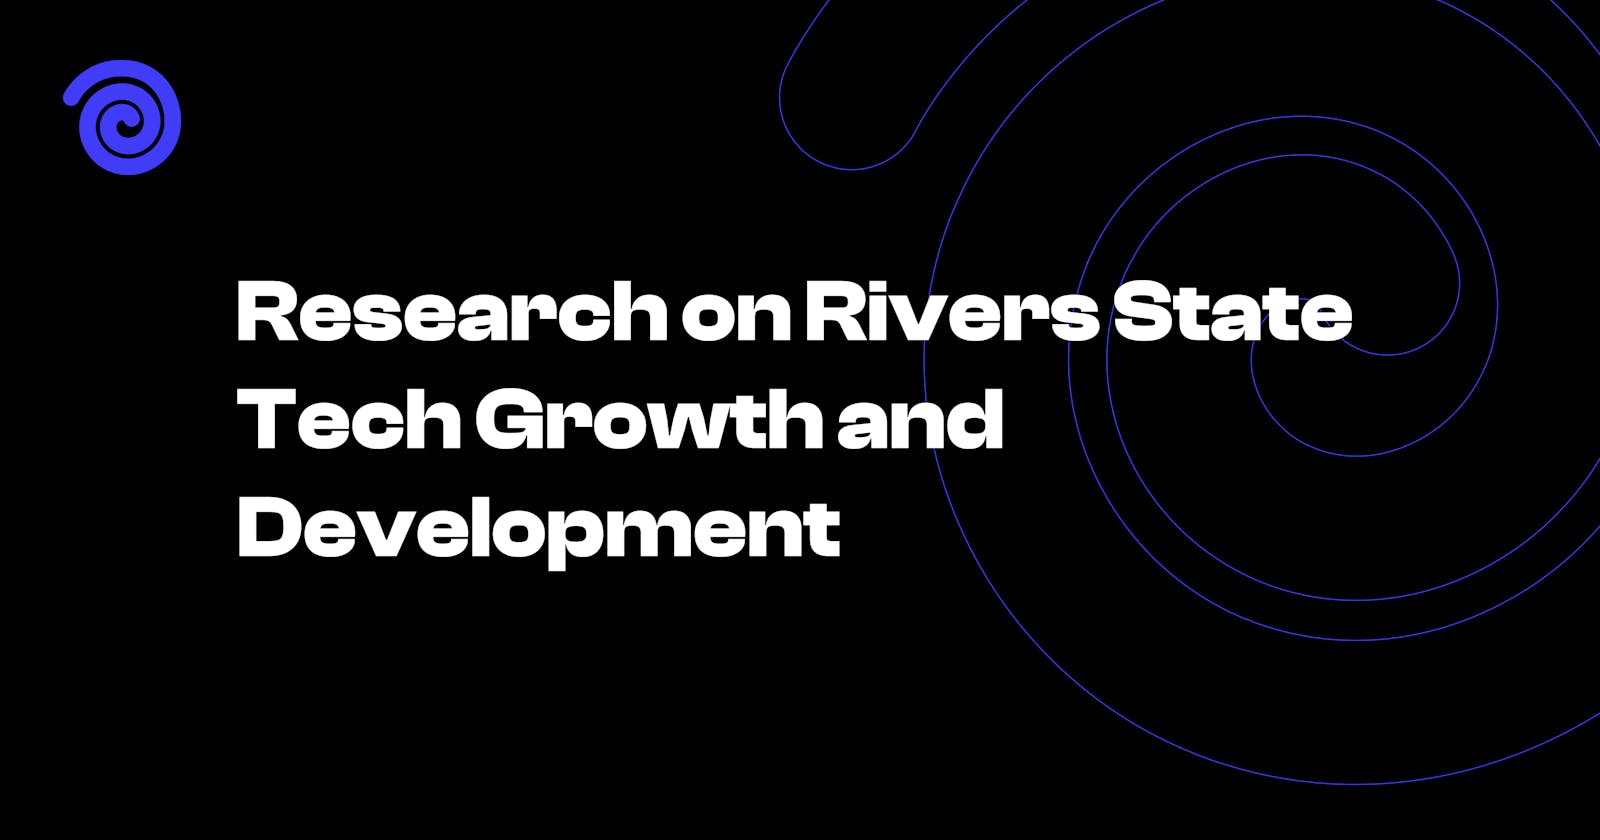 Research on Rivers State Tech Growth and Development: